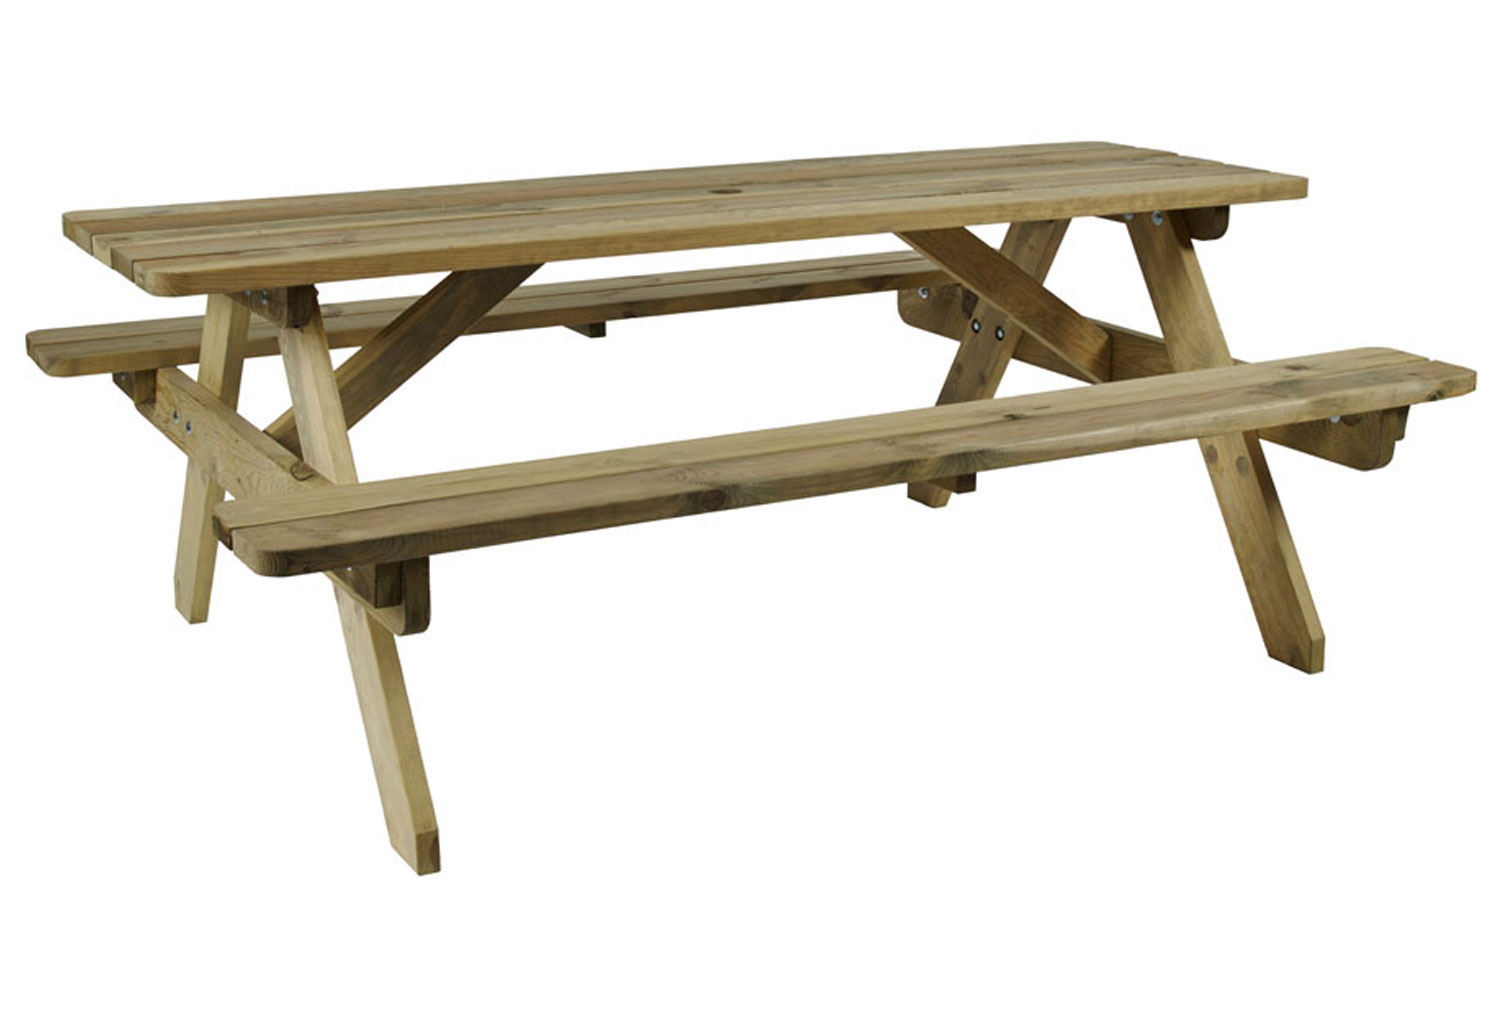 Qty 2 - Hexham Picnic Table, 8 Seater